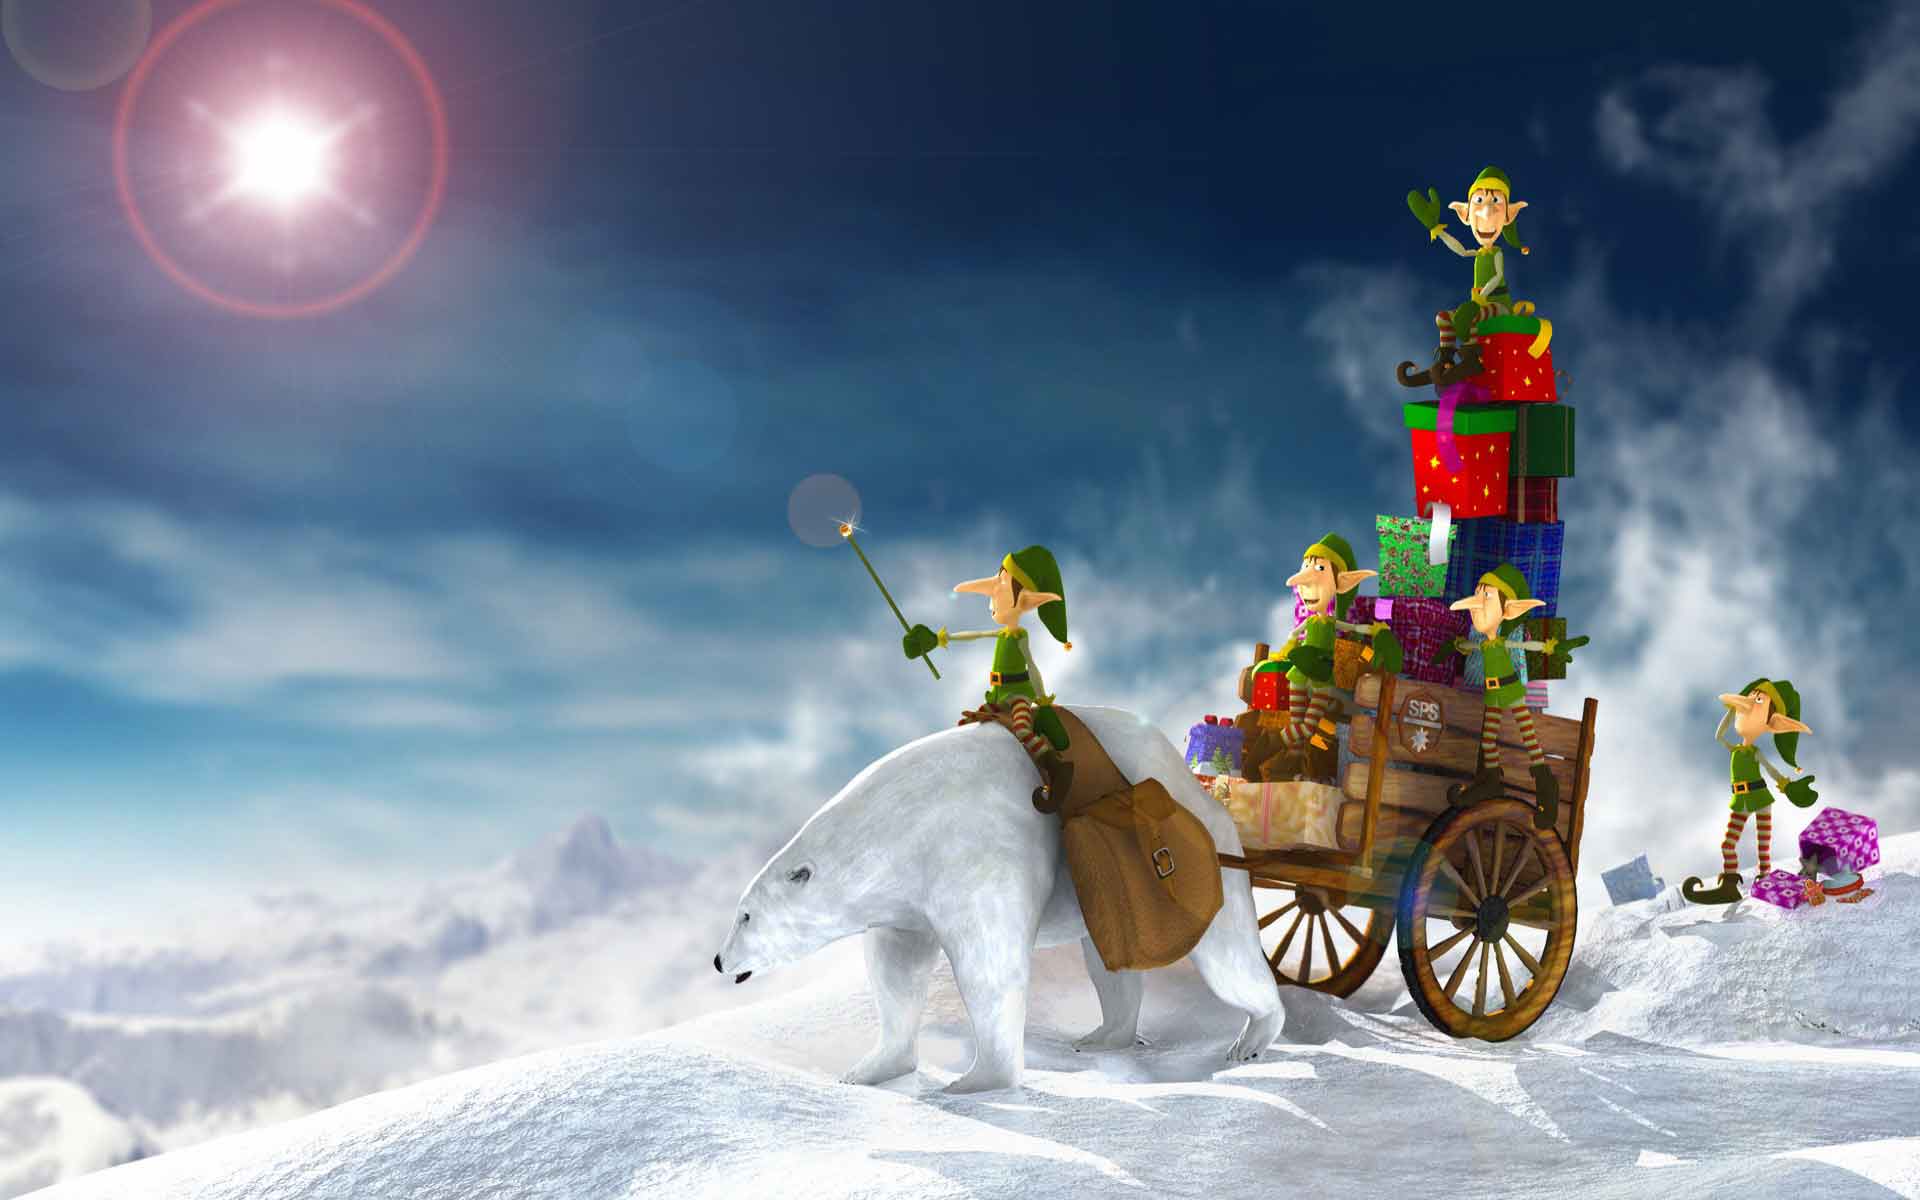 Free Wallpapers - Christmas elves and gifts wallpaper